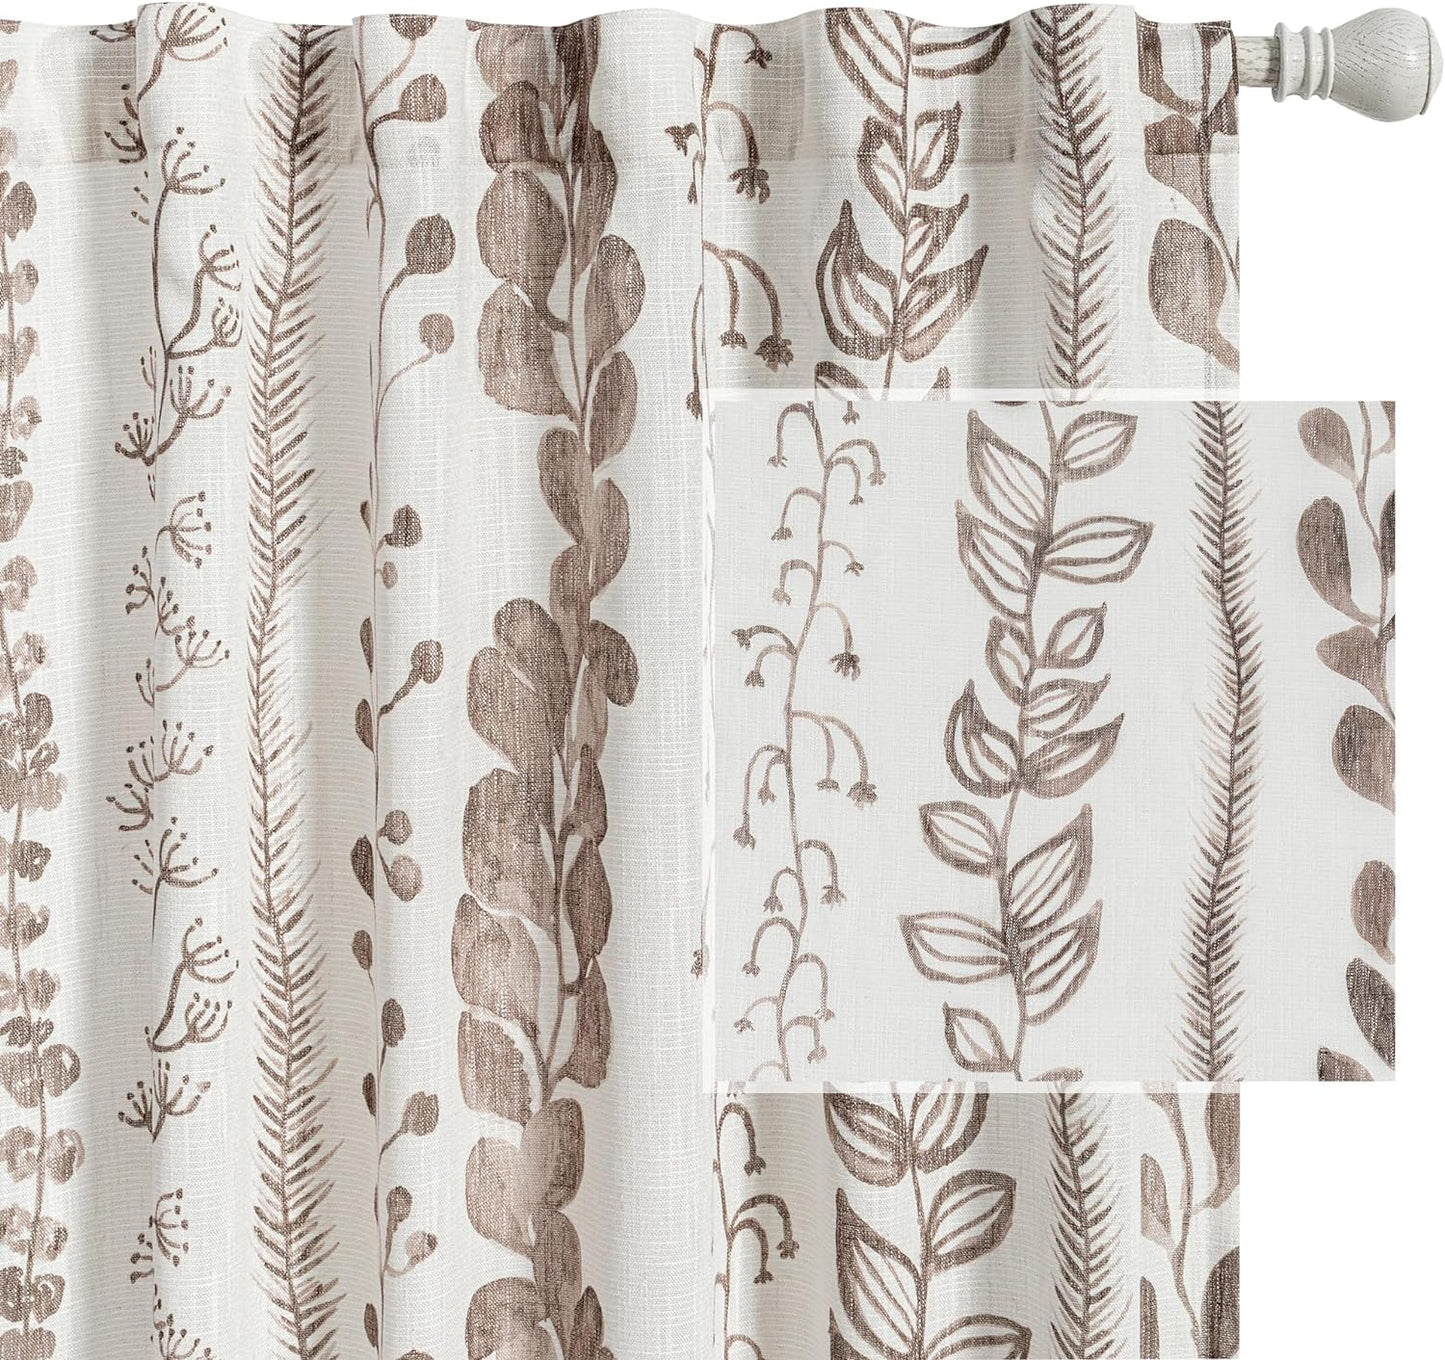 Boho Curtains for Living Room Light Filtering Privacy Protection Cotton Curtains 84 Inch Length 2 Panels Bohemian Linen Style Back Tab Window Leaf Print Classical Drapes for Dining Room  MEETSKY Leaves-Brown 50"W X 84"L 